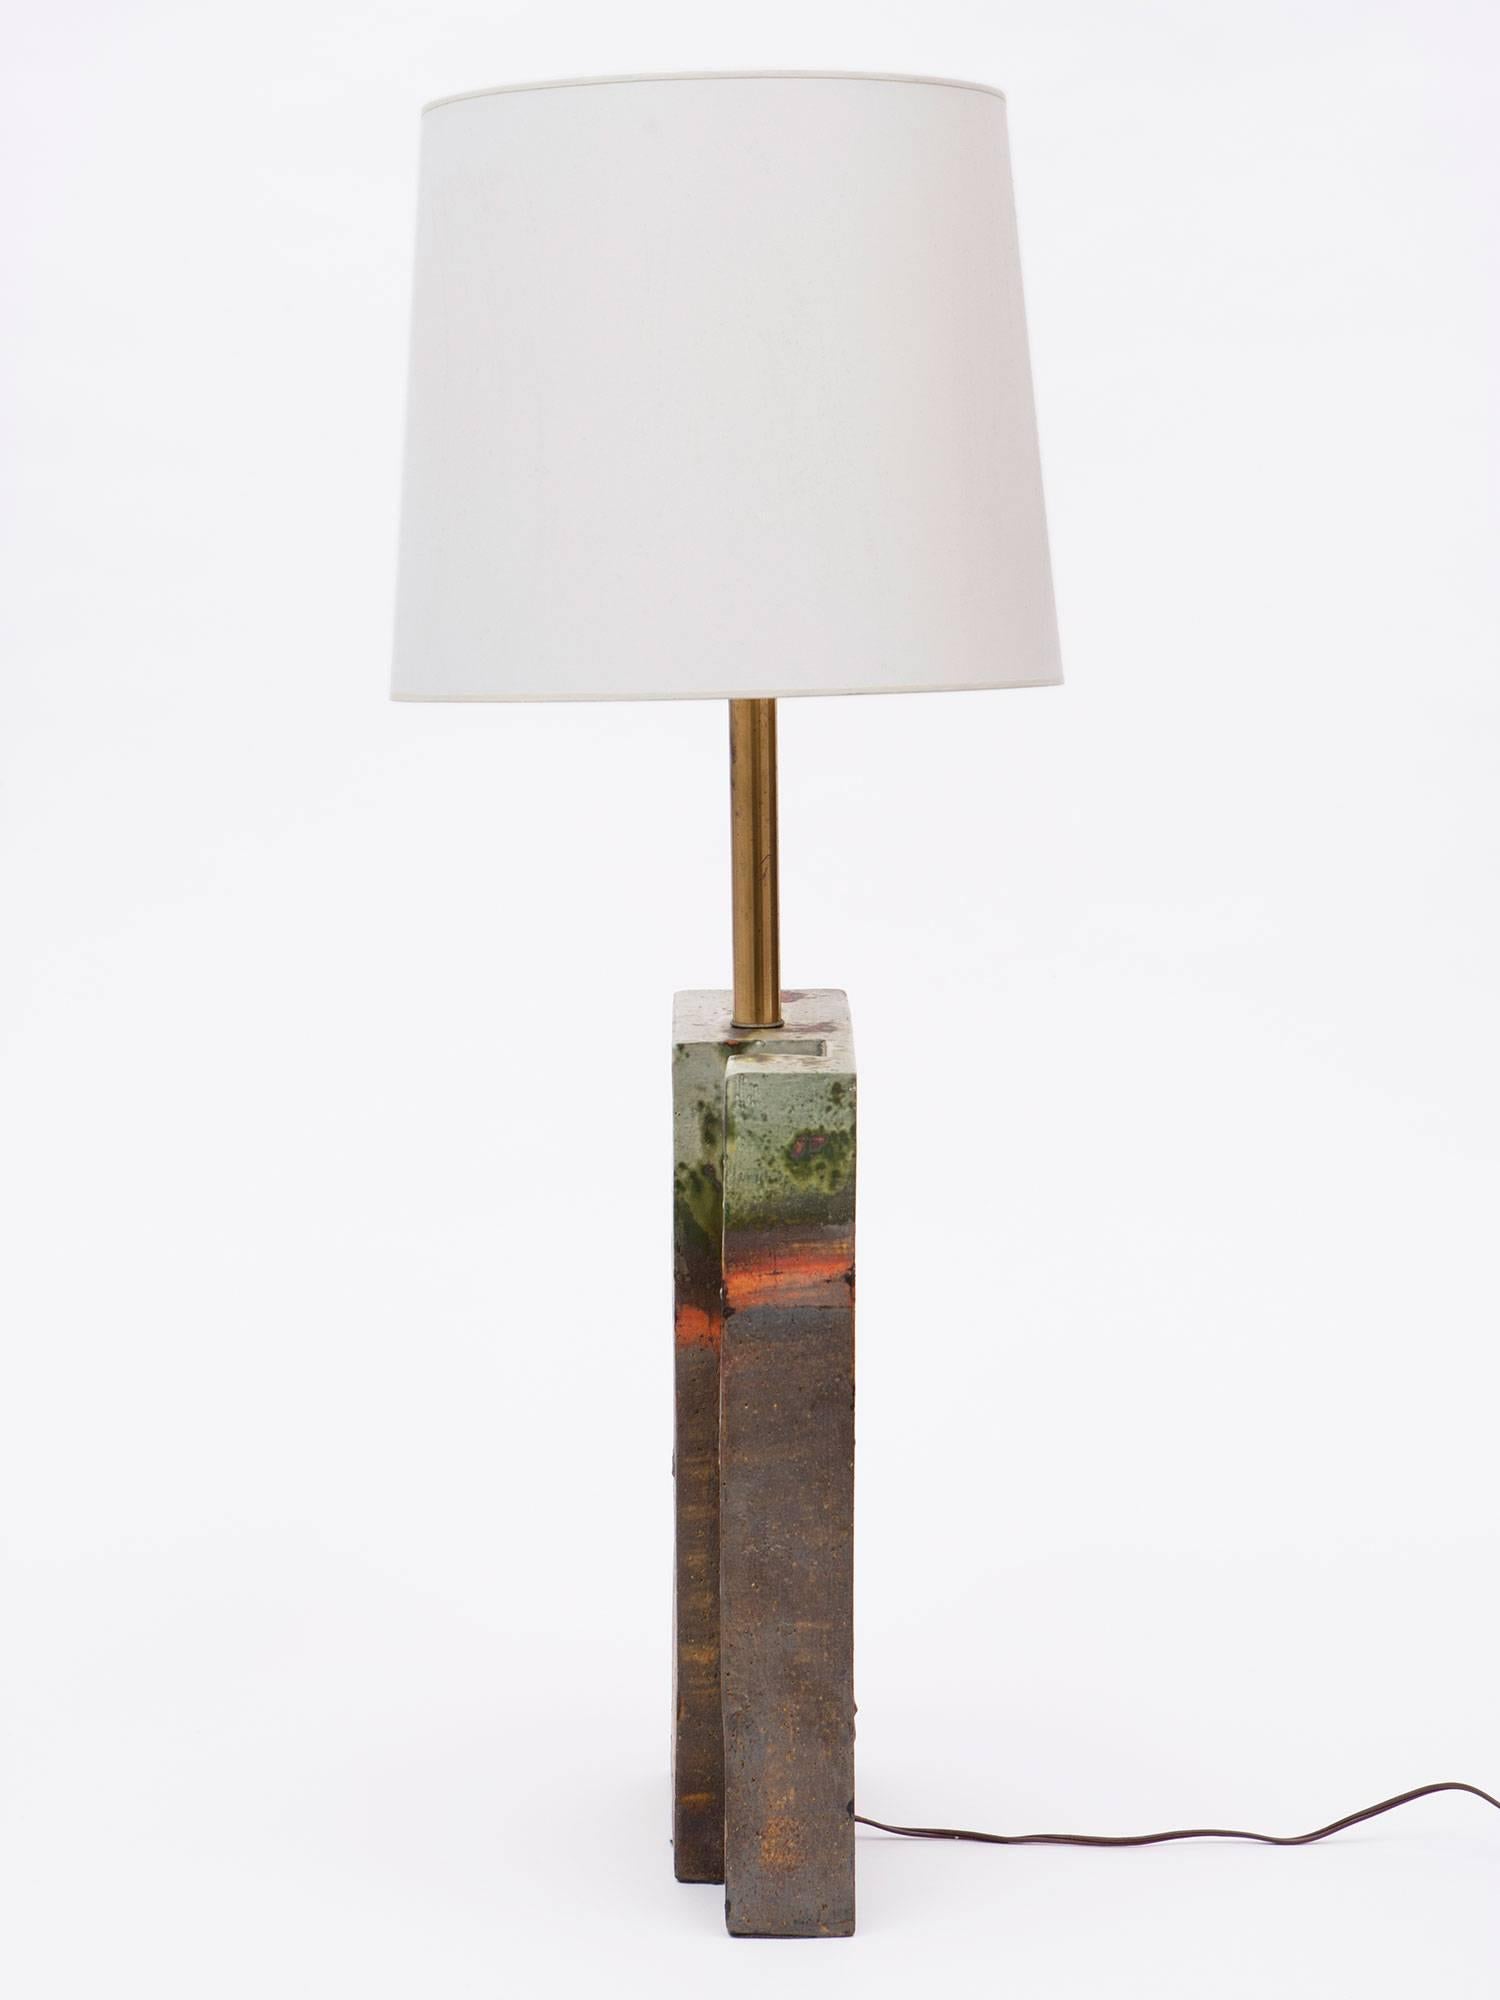 A hand-glazed ceramic table lamp by post-war Italian ceramicist Marcello Fantoni for Raymor. Fantoni's work combined traditional Italian pottery techniques with the Modernist movement styles of the 20th century. Considered a master ceramicist, his